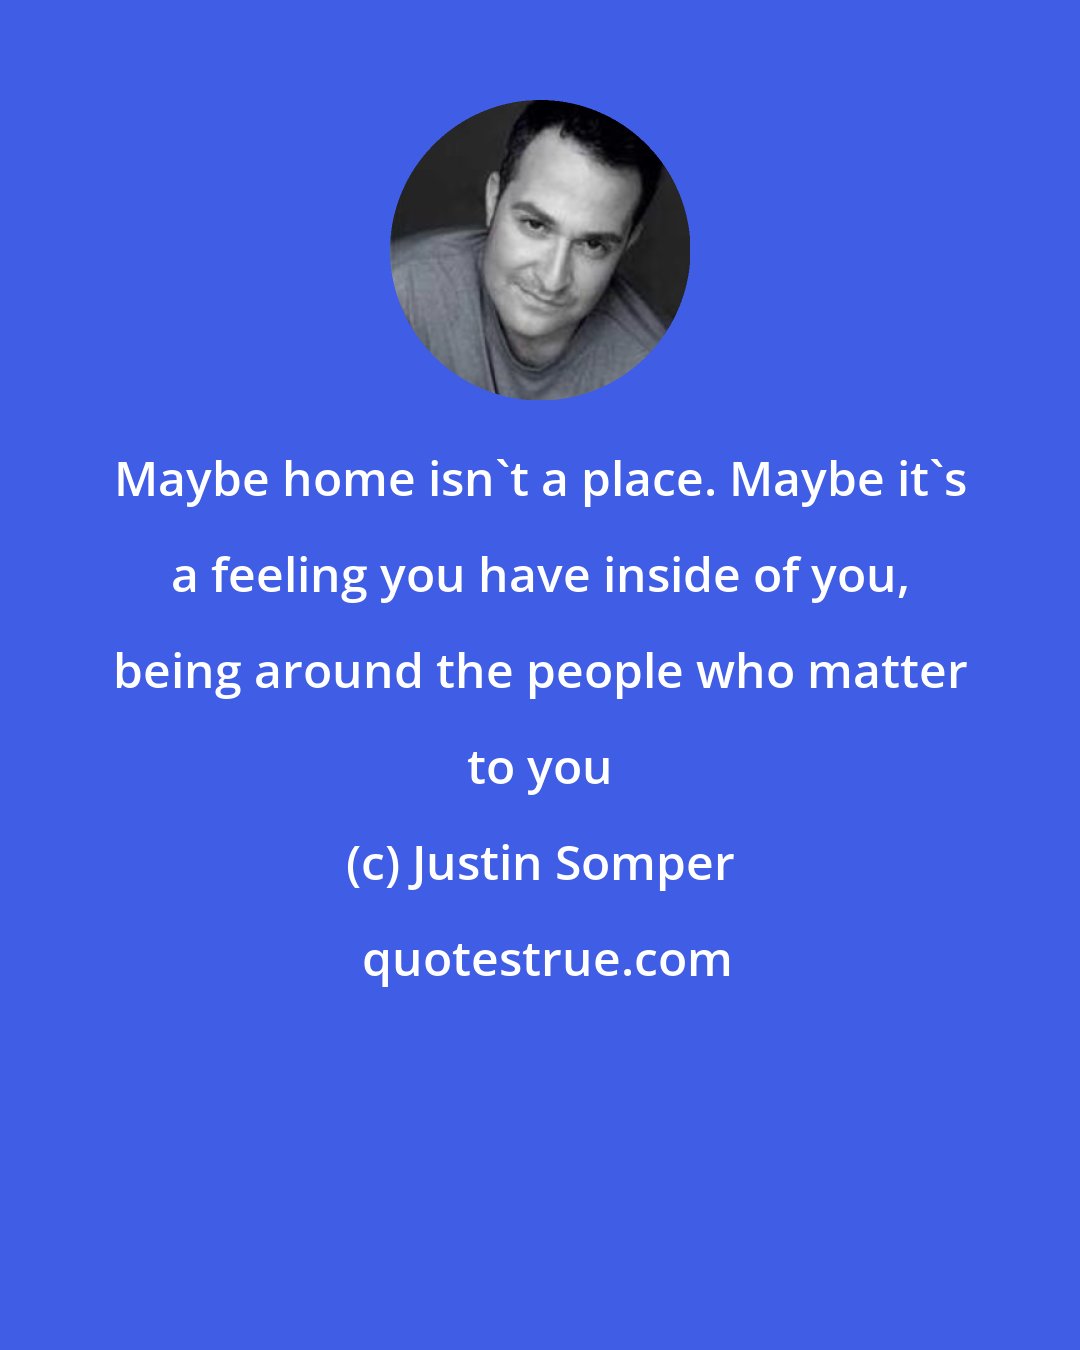 Justin Somper: Maybe home isn't a place. Maybe it's a feeling you have inside of you, being around the people who matter to you